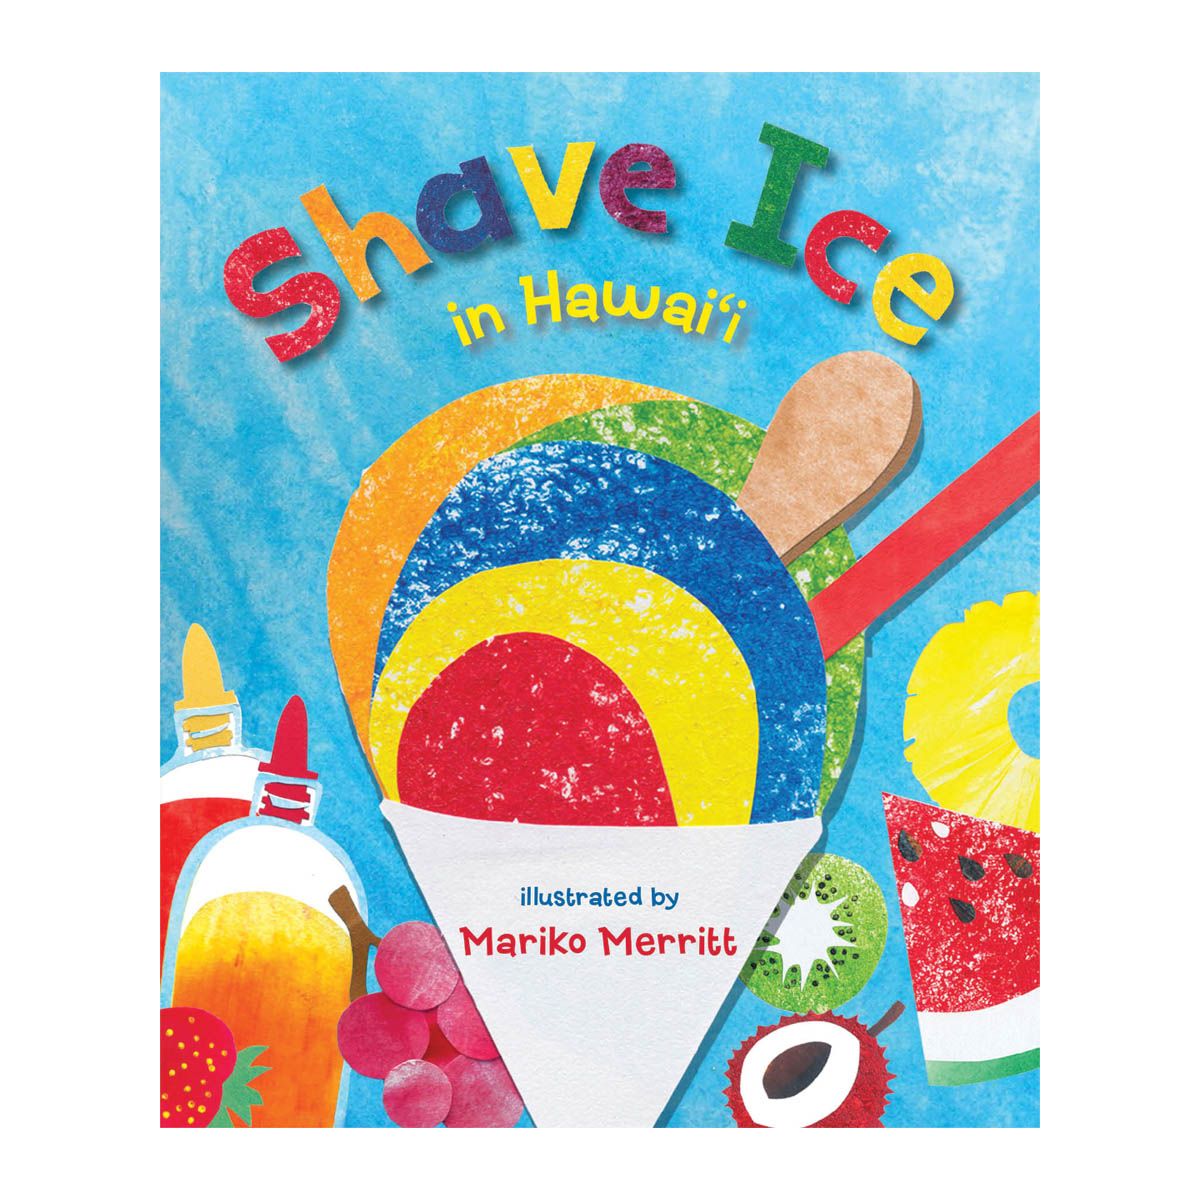 Shave Ice in Hawaiʻi